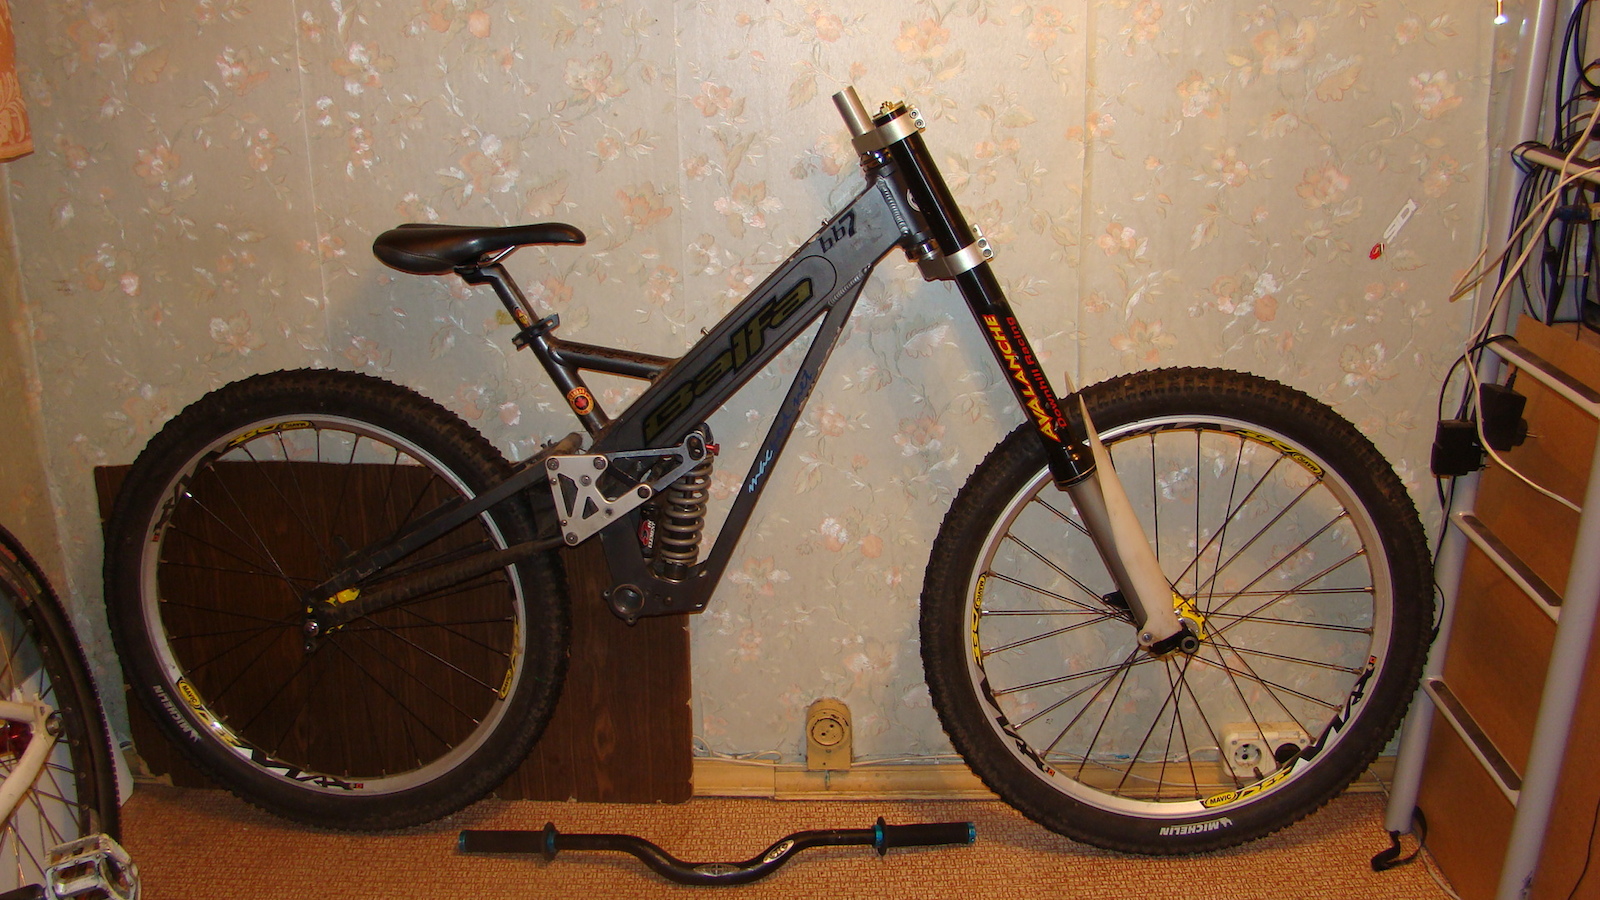 Balfa bb7 ' 03 with Avalanche DHF 8.5